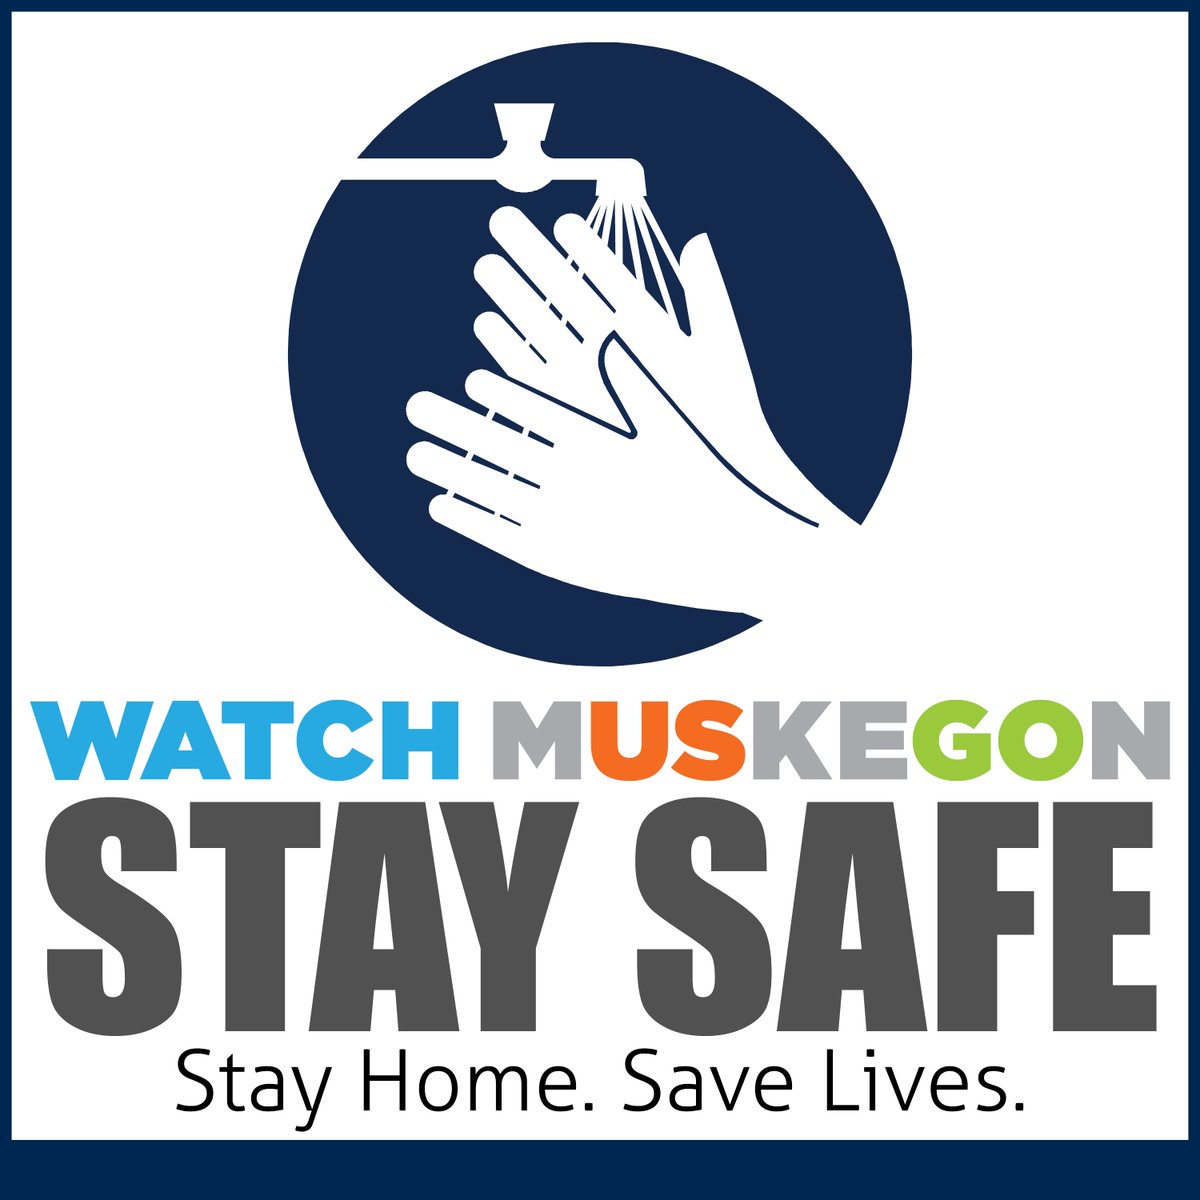 The choices you make today have a major impact on your community. Mask up and stay safe! #ThisIsMuskegon